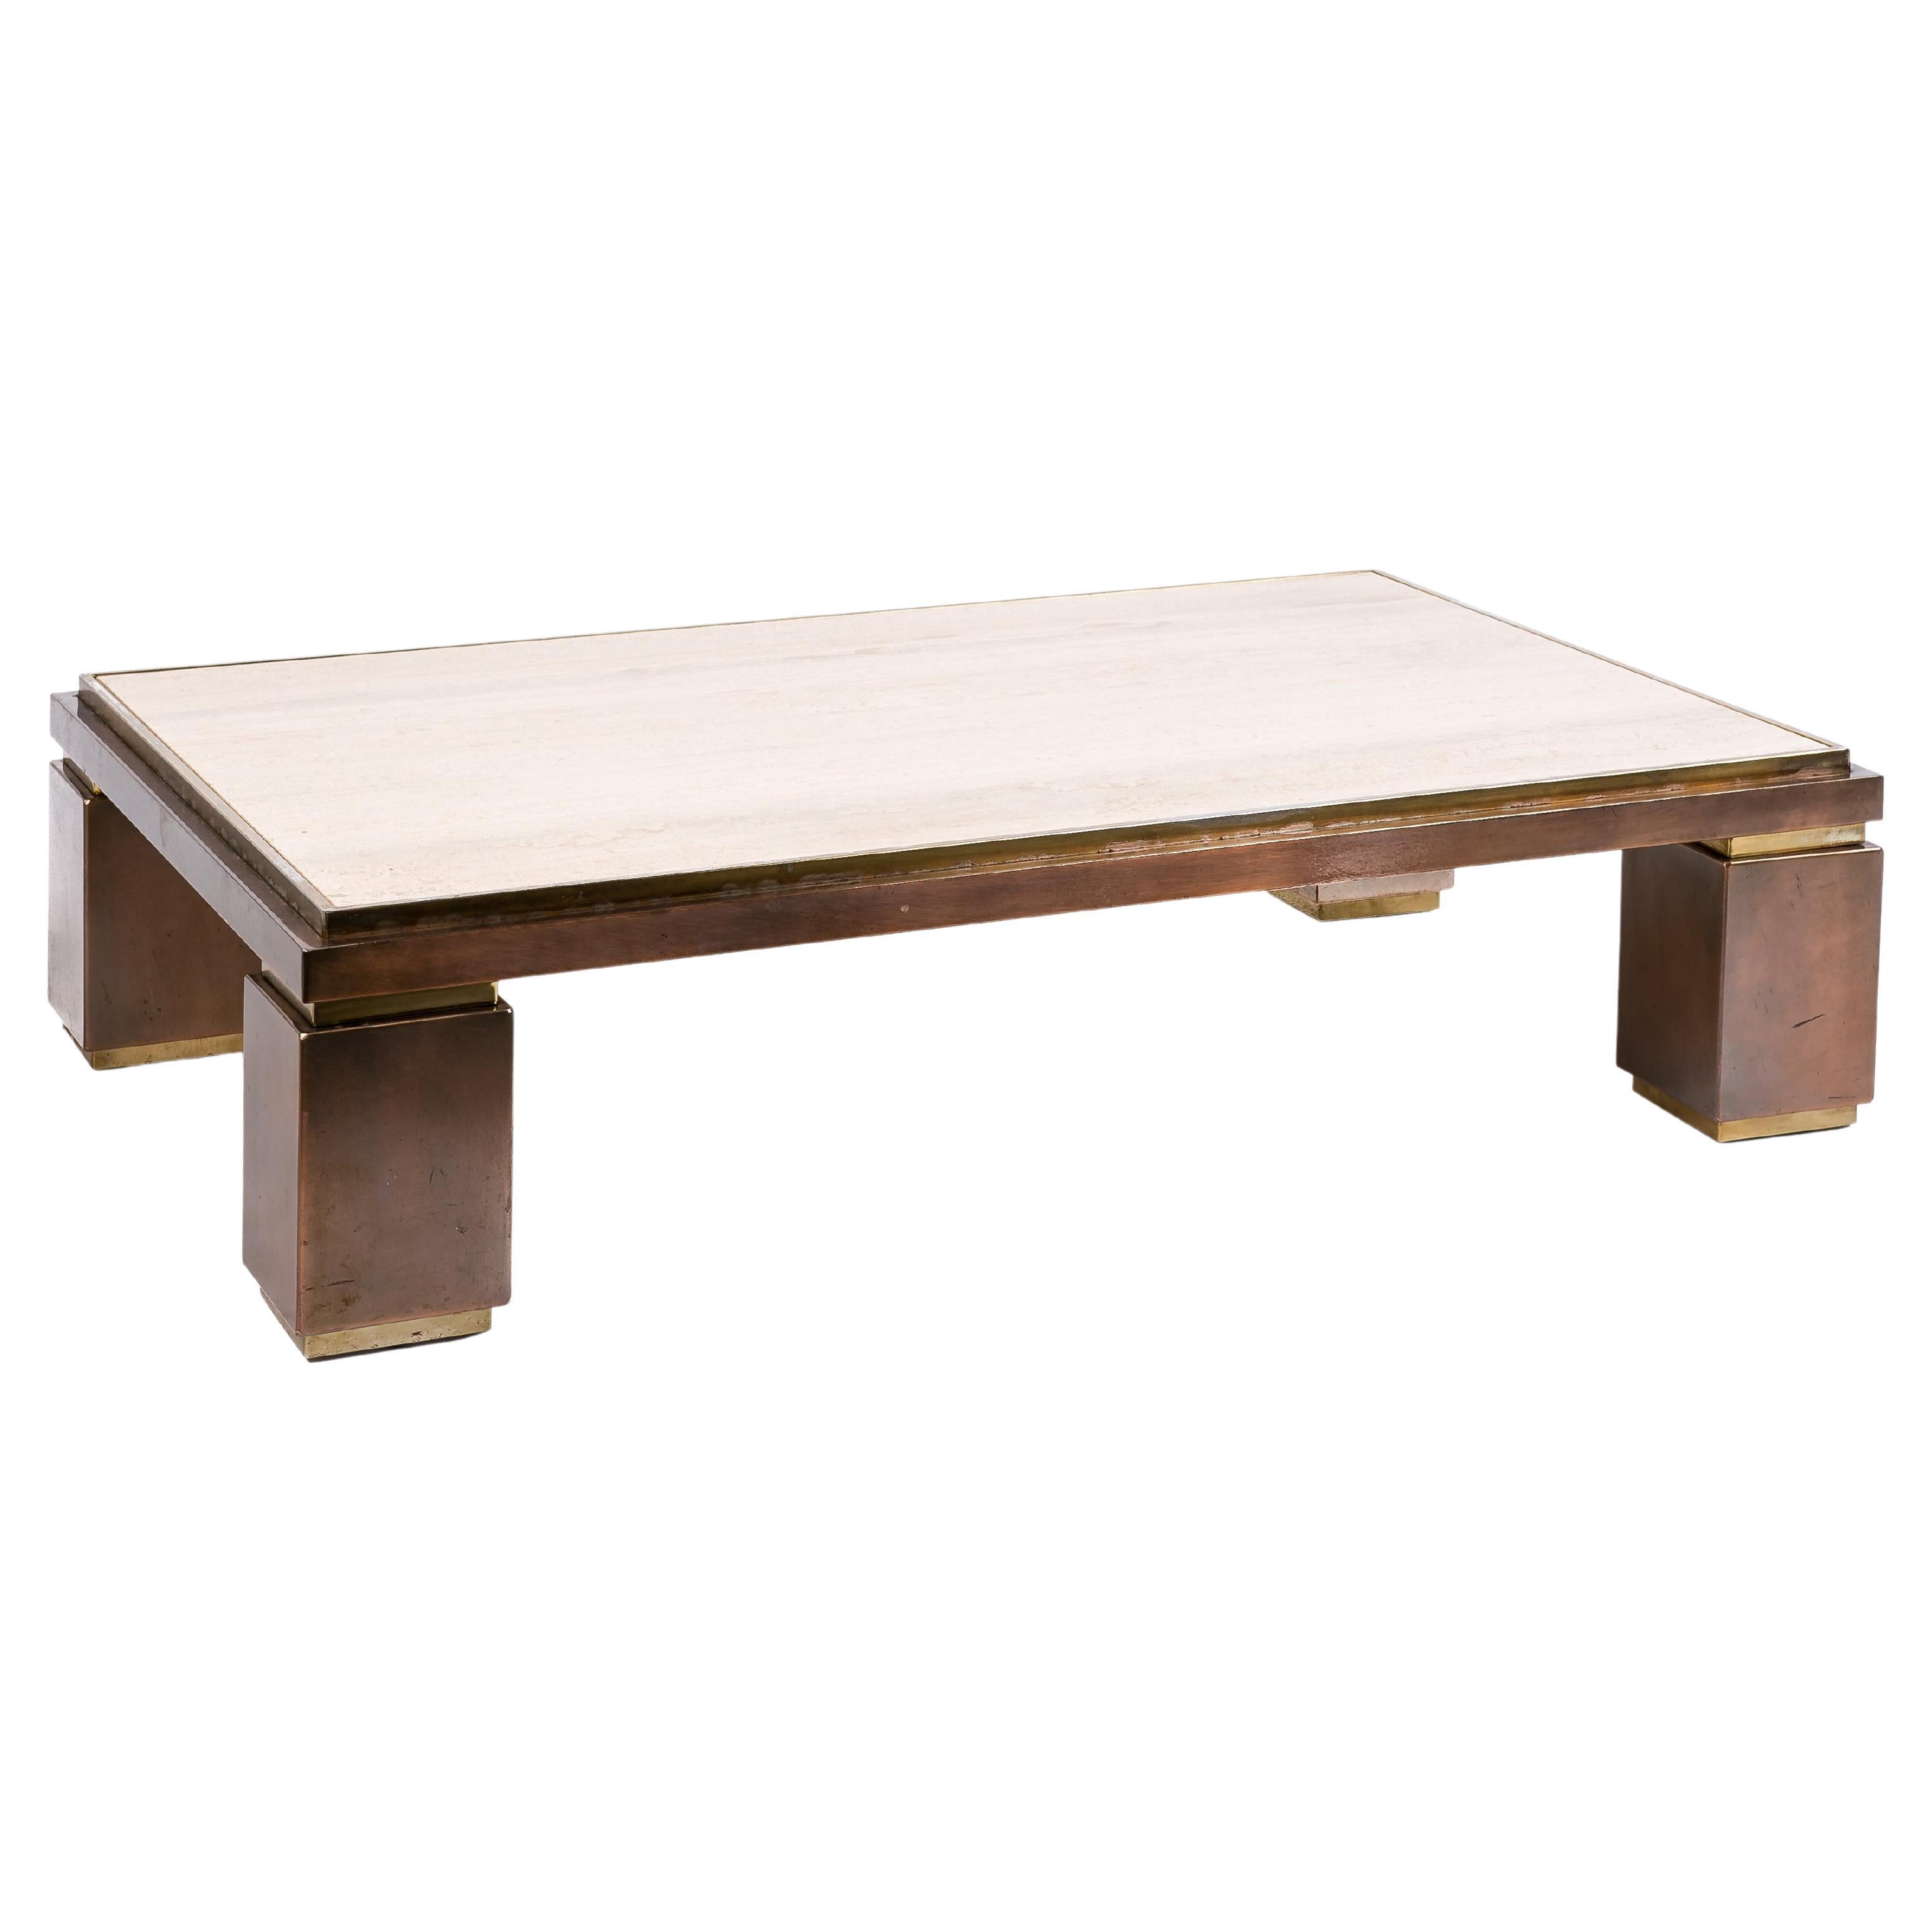 Hollywood Regency Travertine and Brass Coffee Table by Belgo Chrome, 1970s For Sale